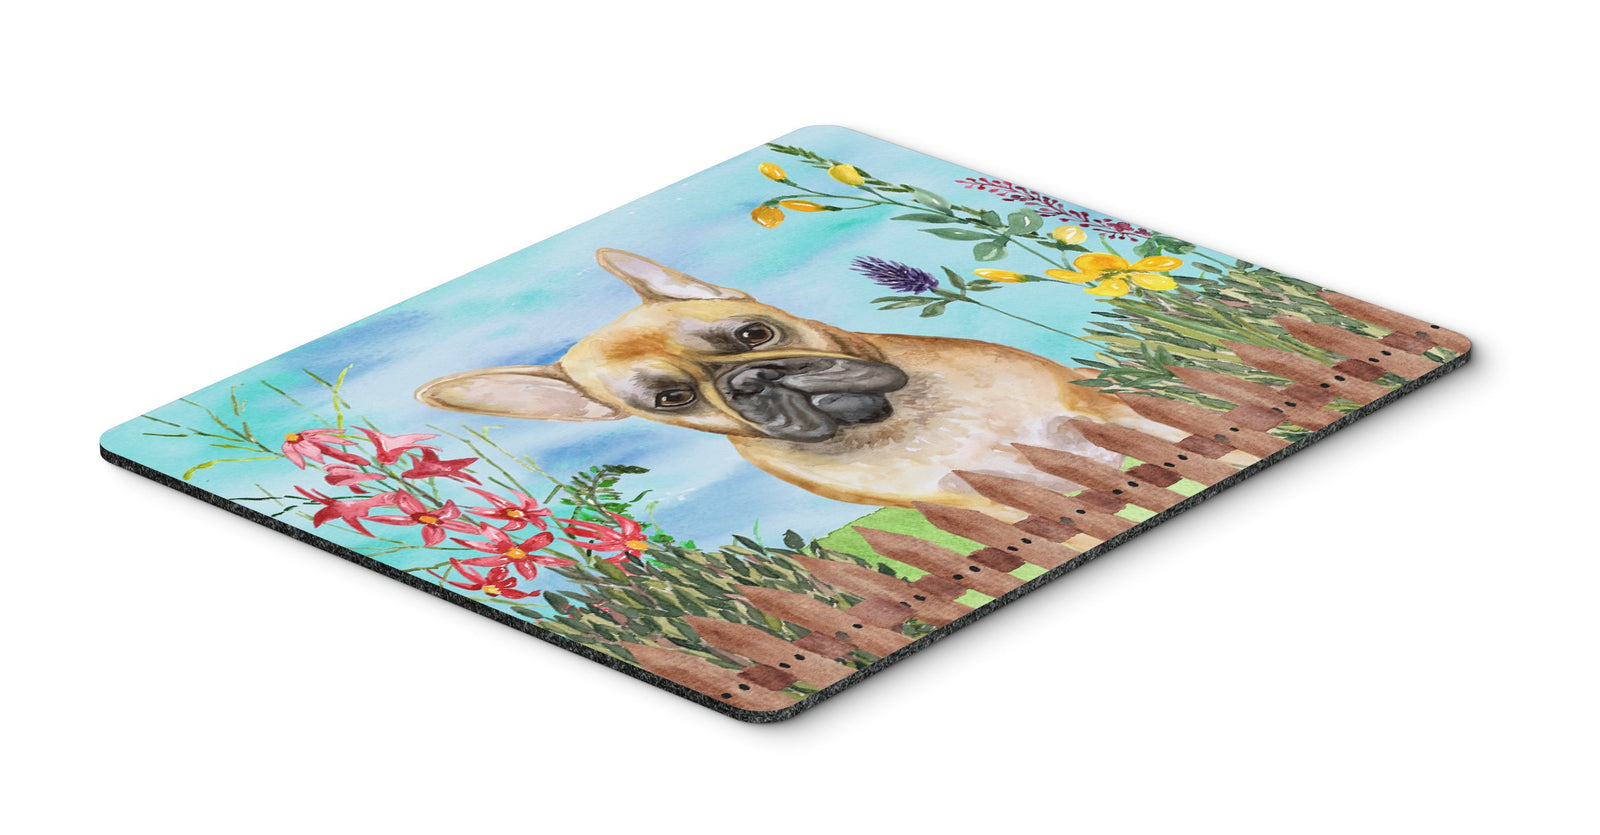 French Bulldog Spring Mouse Pad, Hot Pad or Trivet CK1250MP by Caroline's Treasures